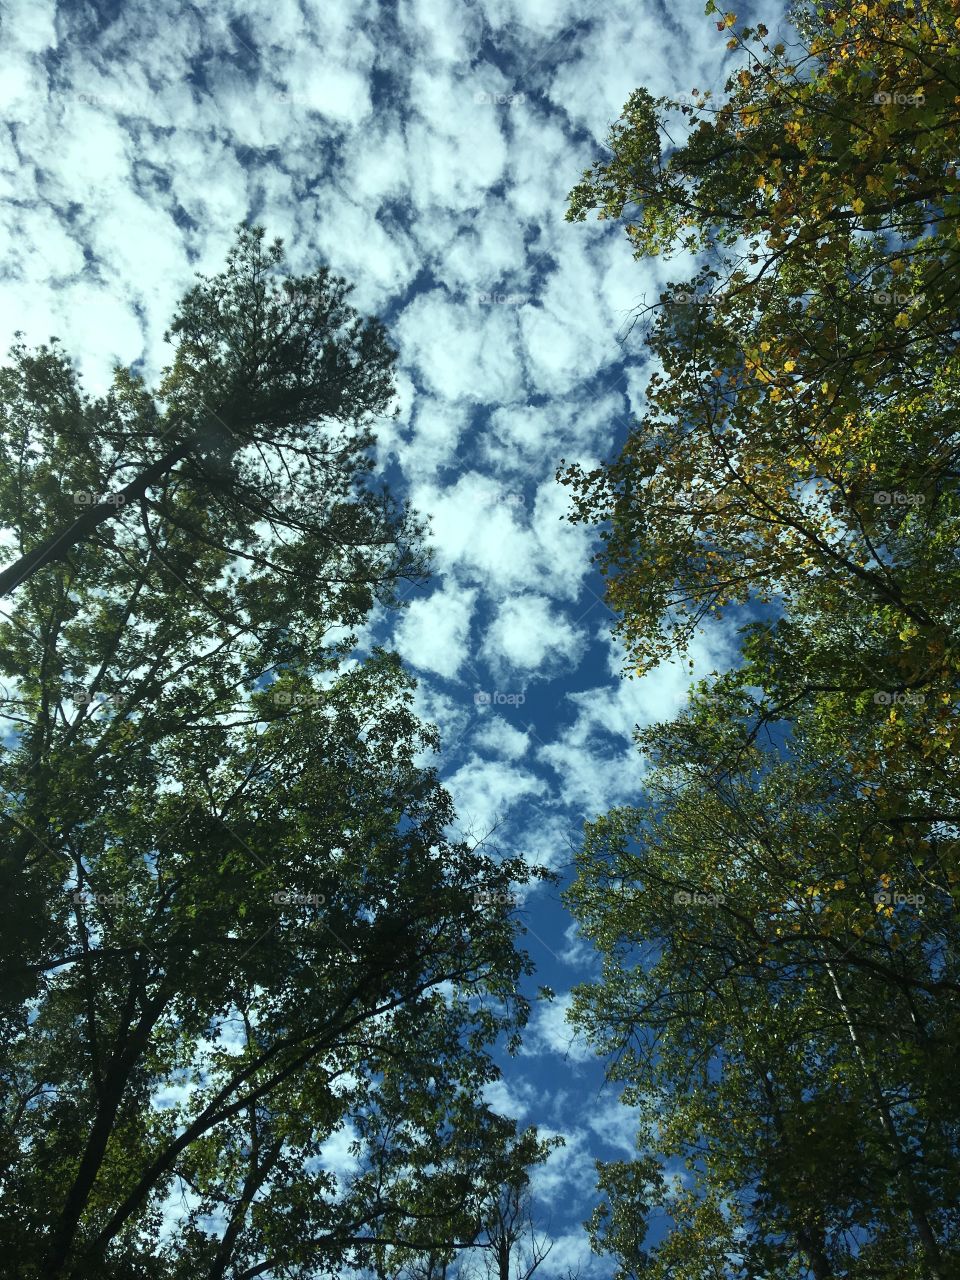 Fall skies at Red River Gorge